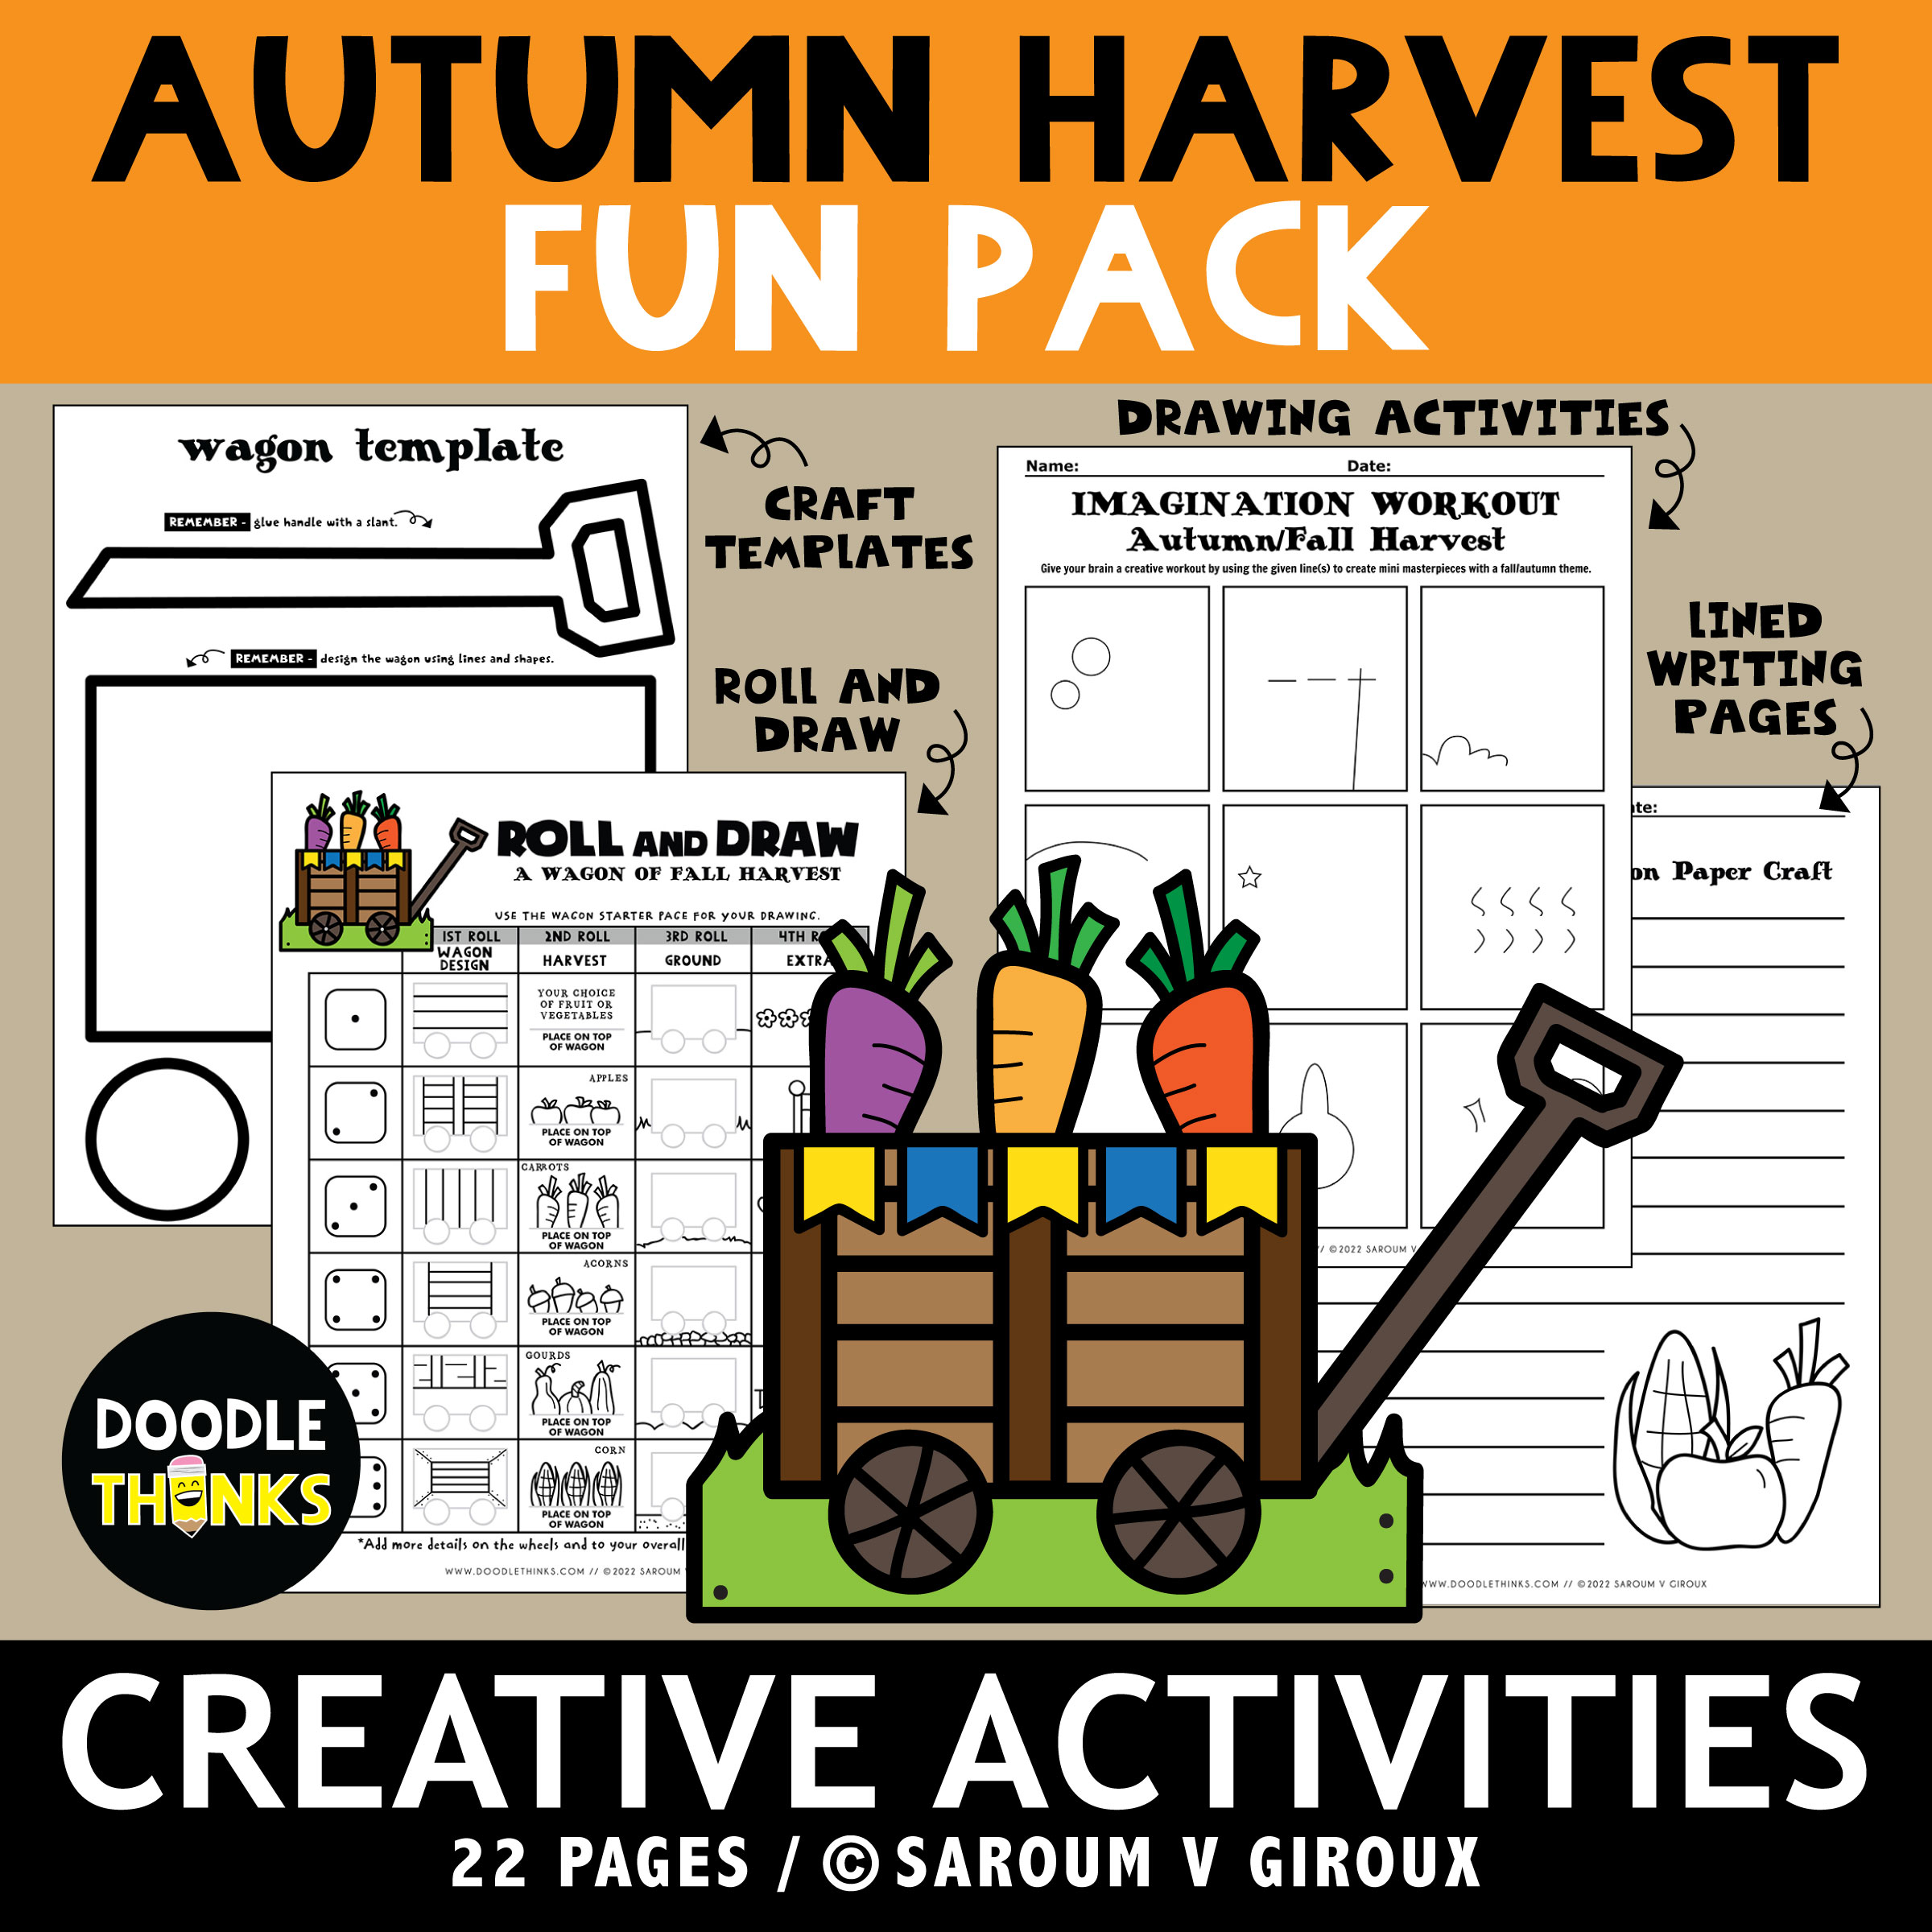 Autumn/Fall Harvest Activity Fun Pack | Craft, Writing, and Drawing Activities's featured image